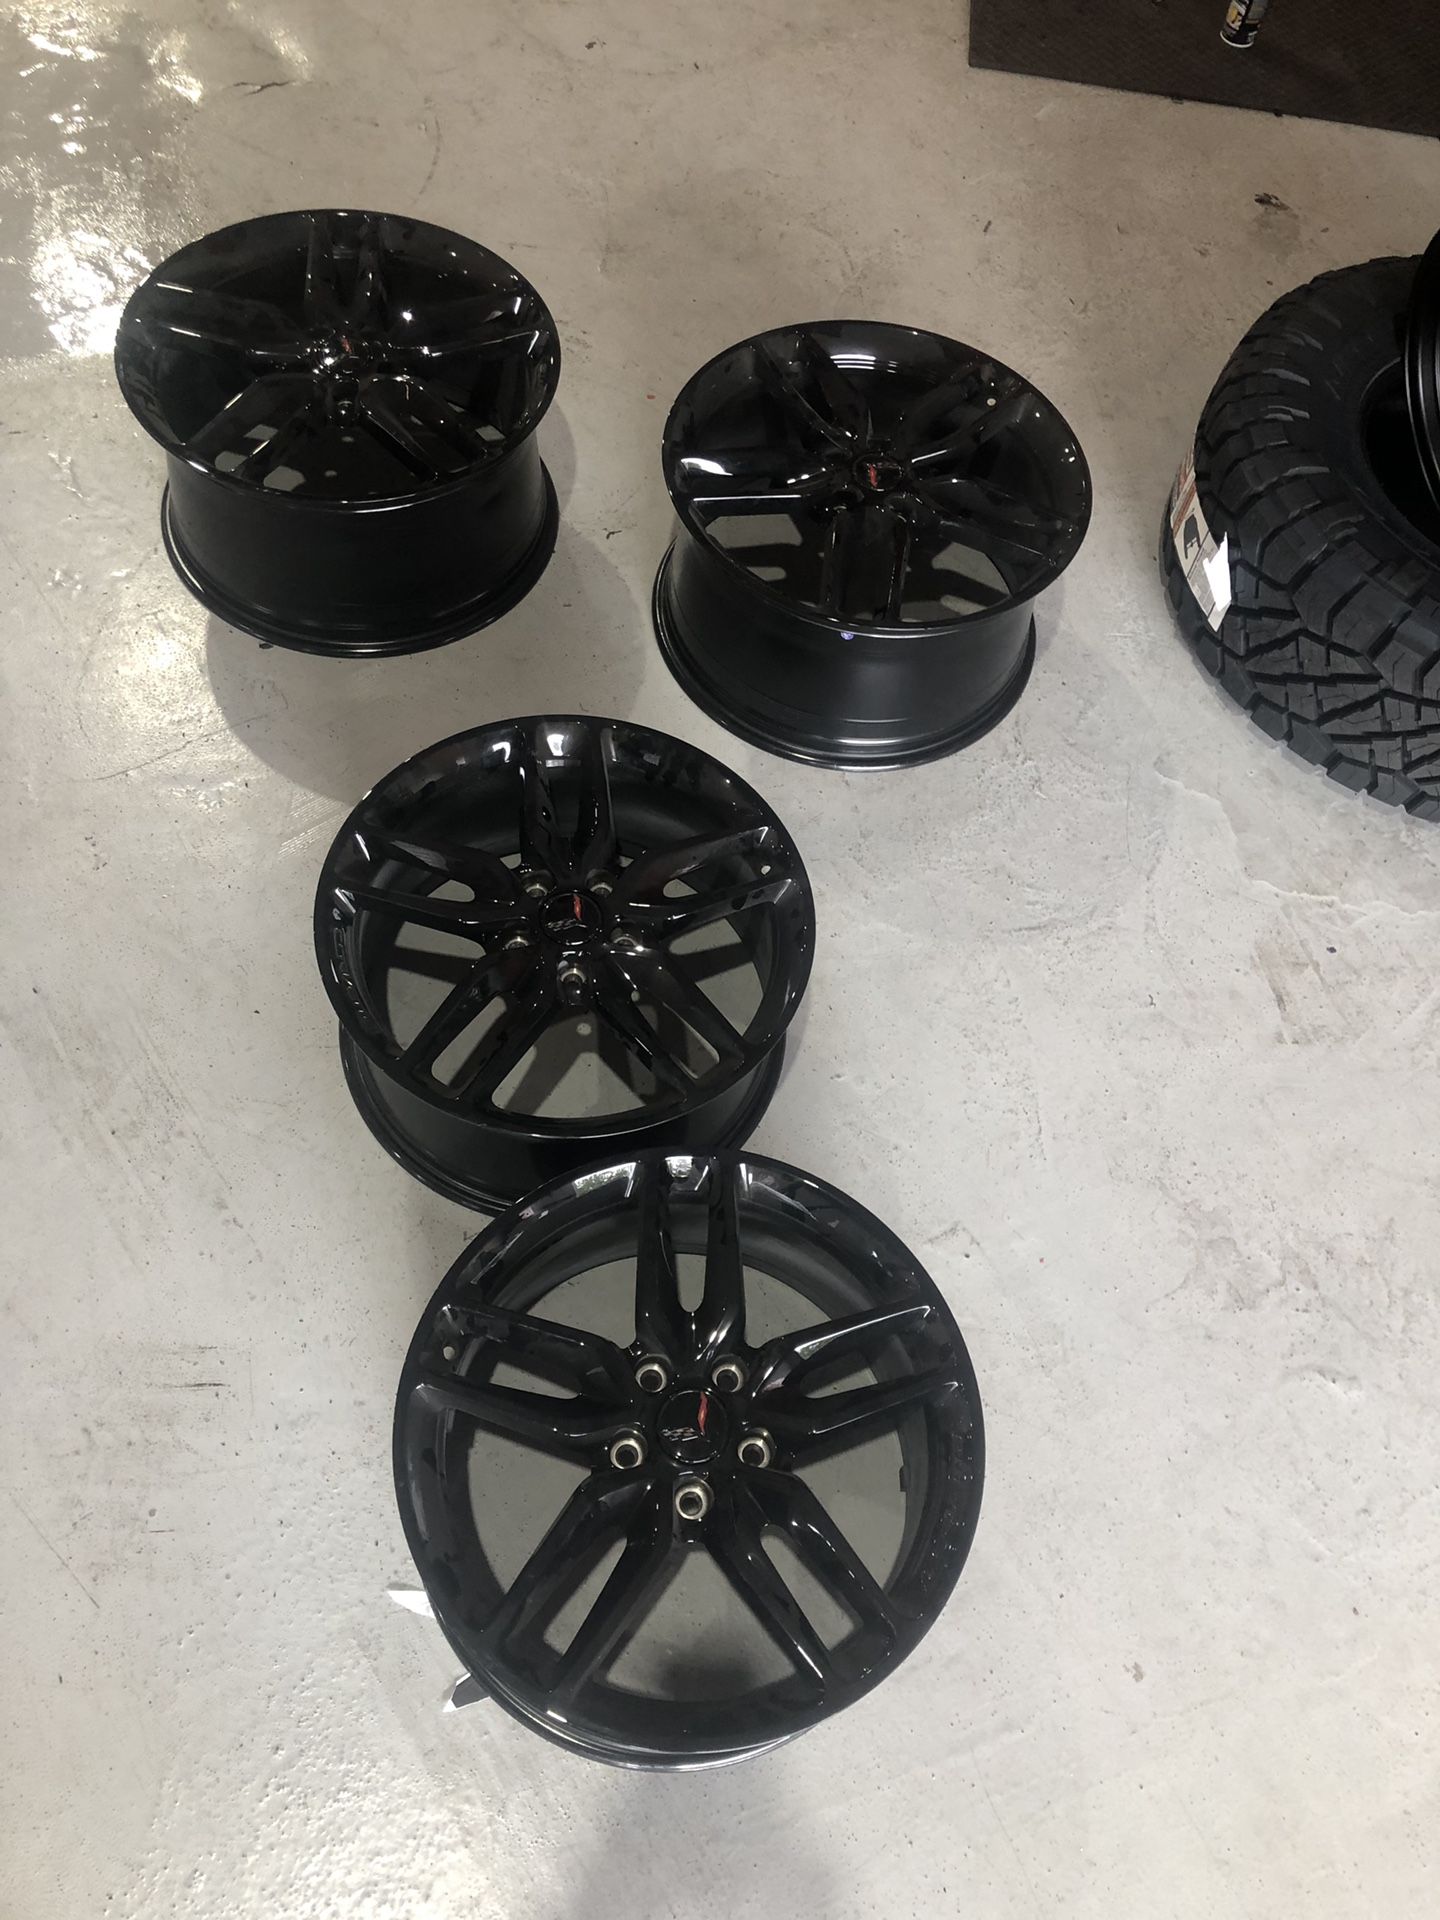 Corvette Z51 OEM Black Wheel Rims only (no tires). Staggered 19” front & 20” rear.